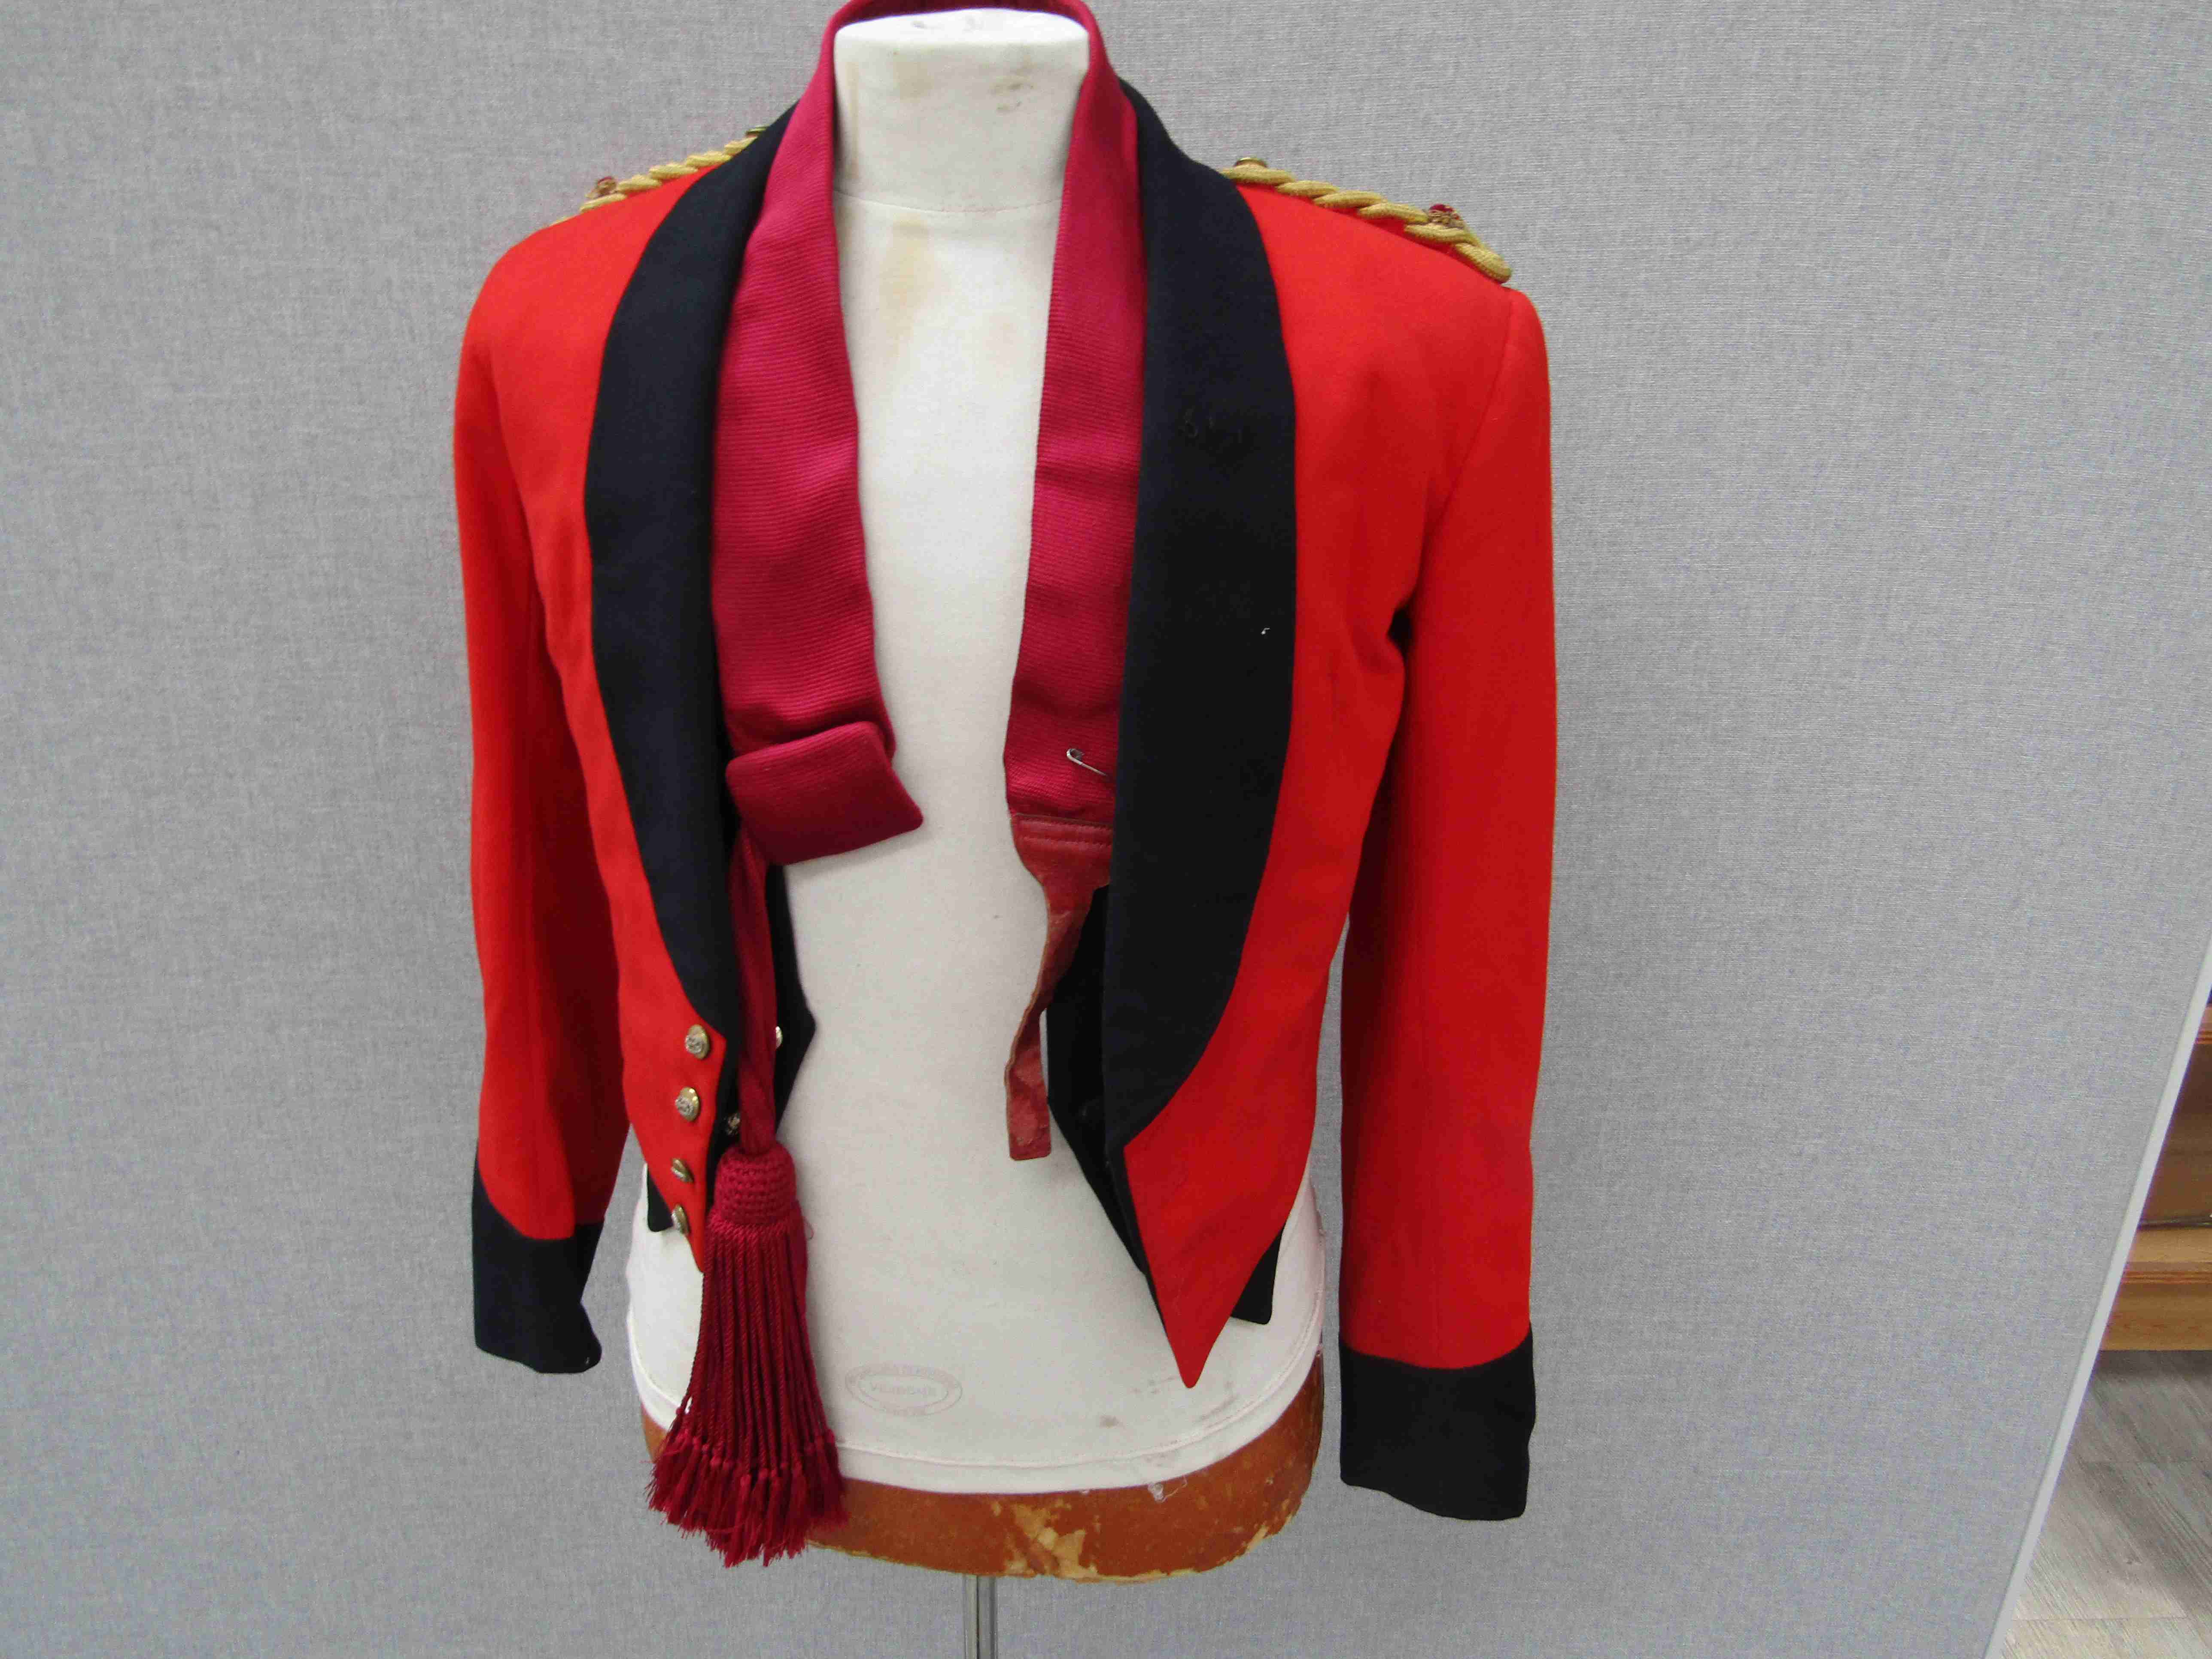 A WWII Army Officer's full mess uniform